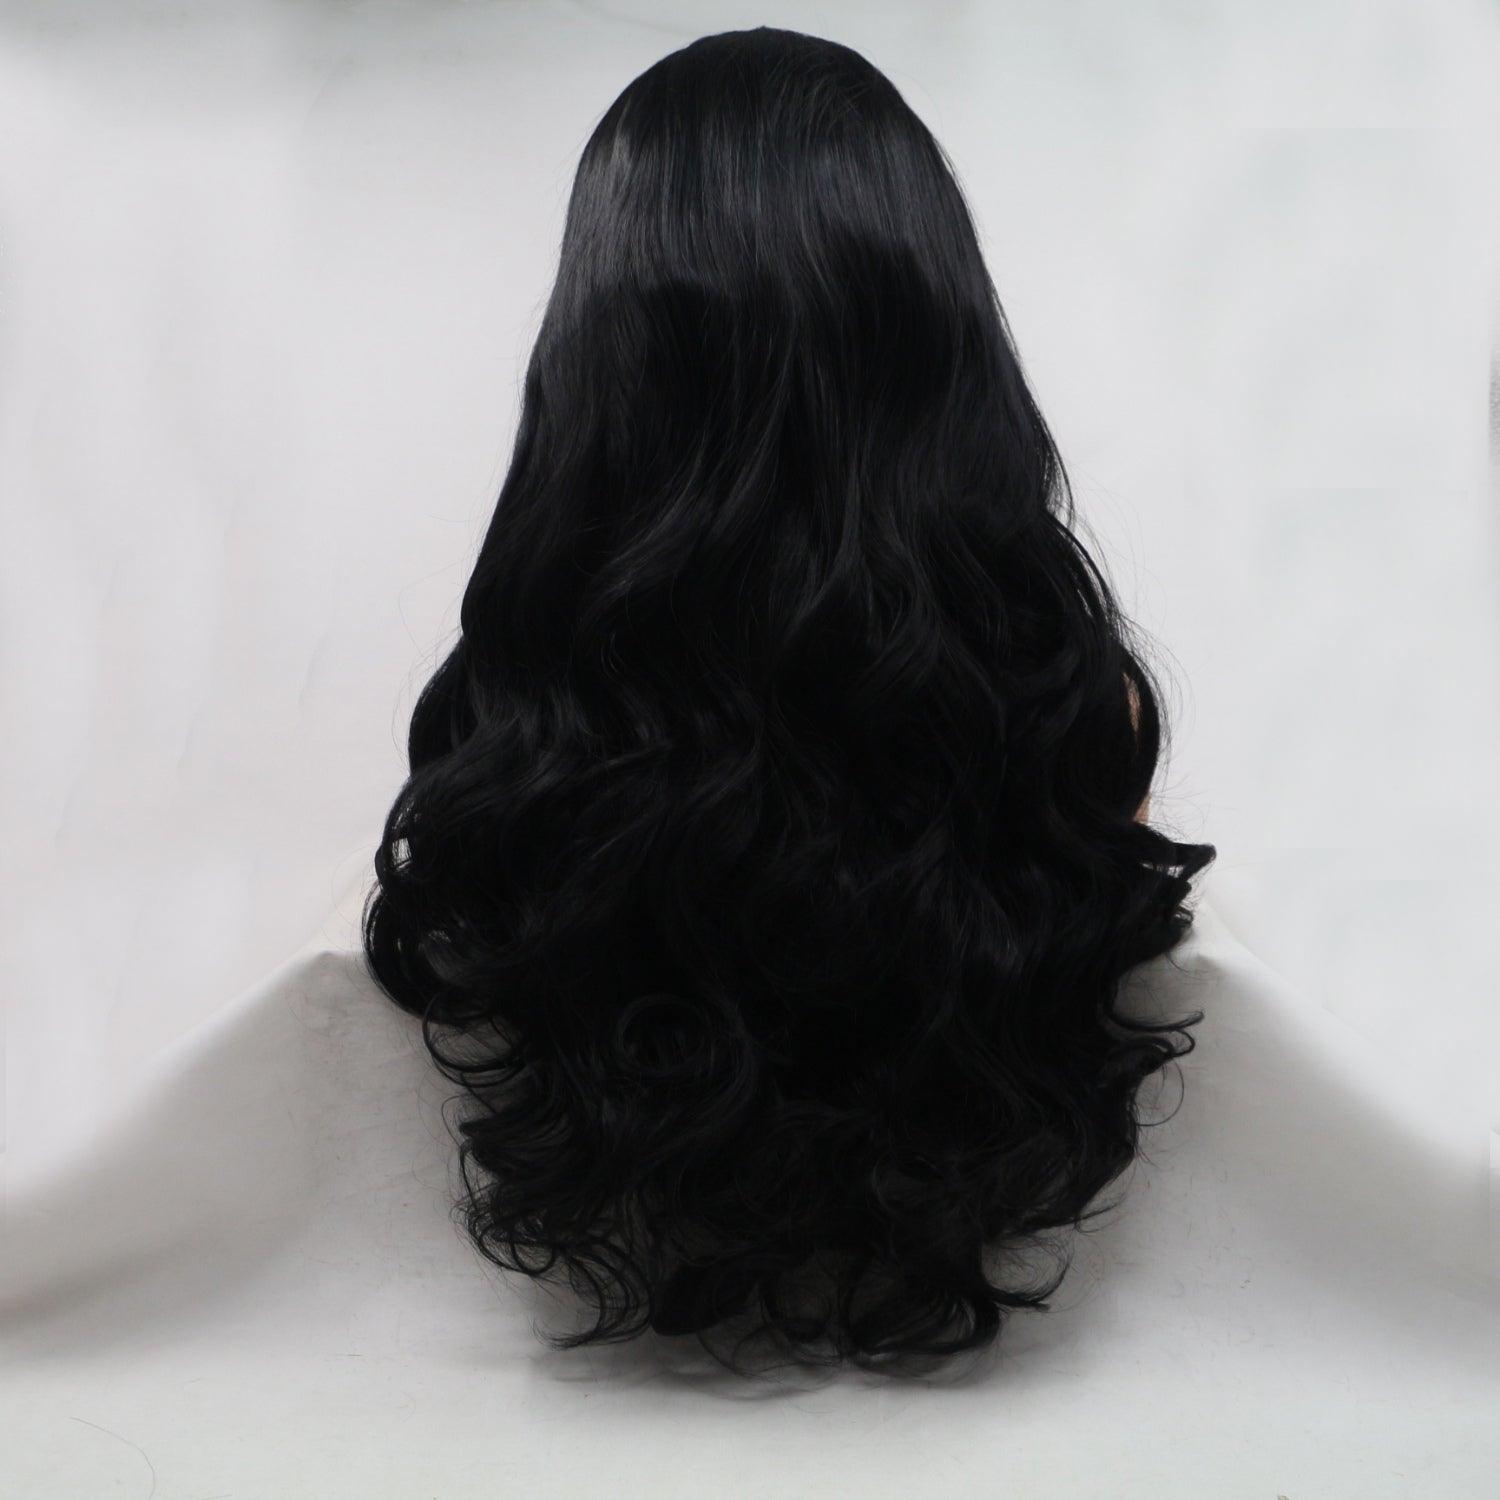 a woman's back view of a long black wig